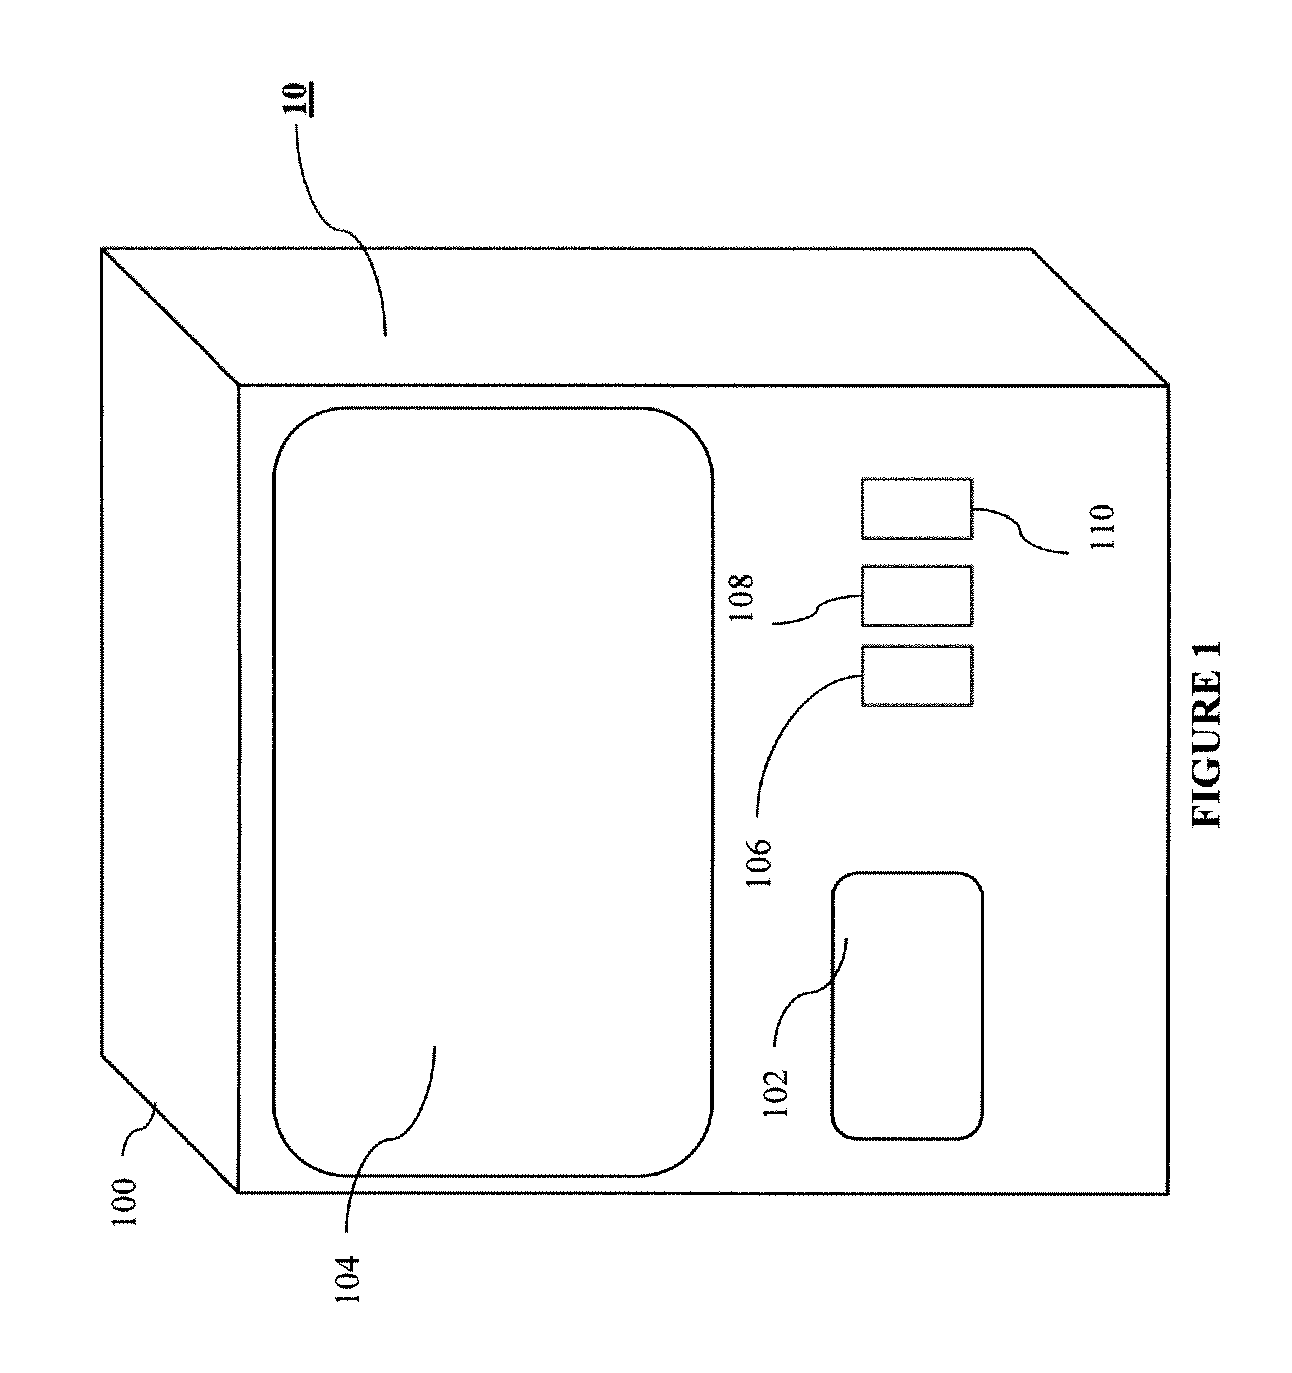 Method and Apparatus for Collecting Recyclable Materials